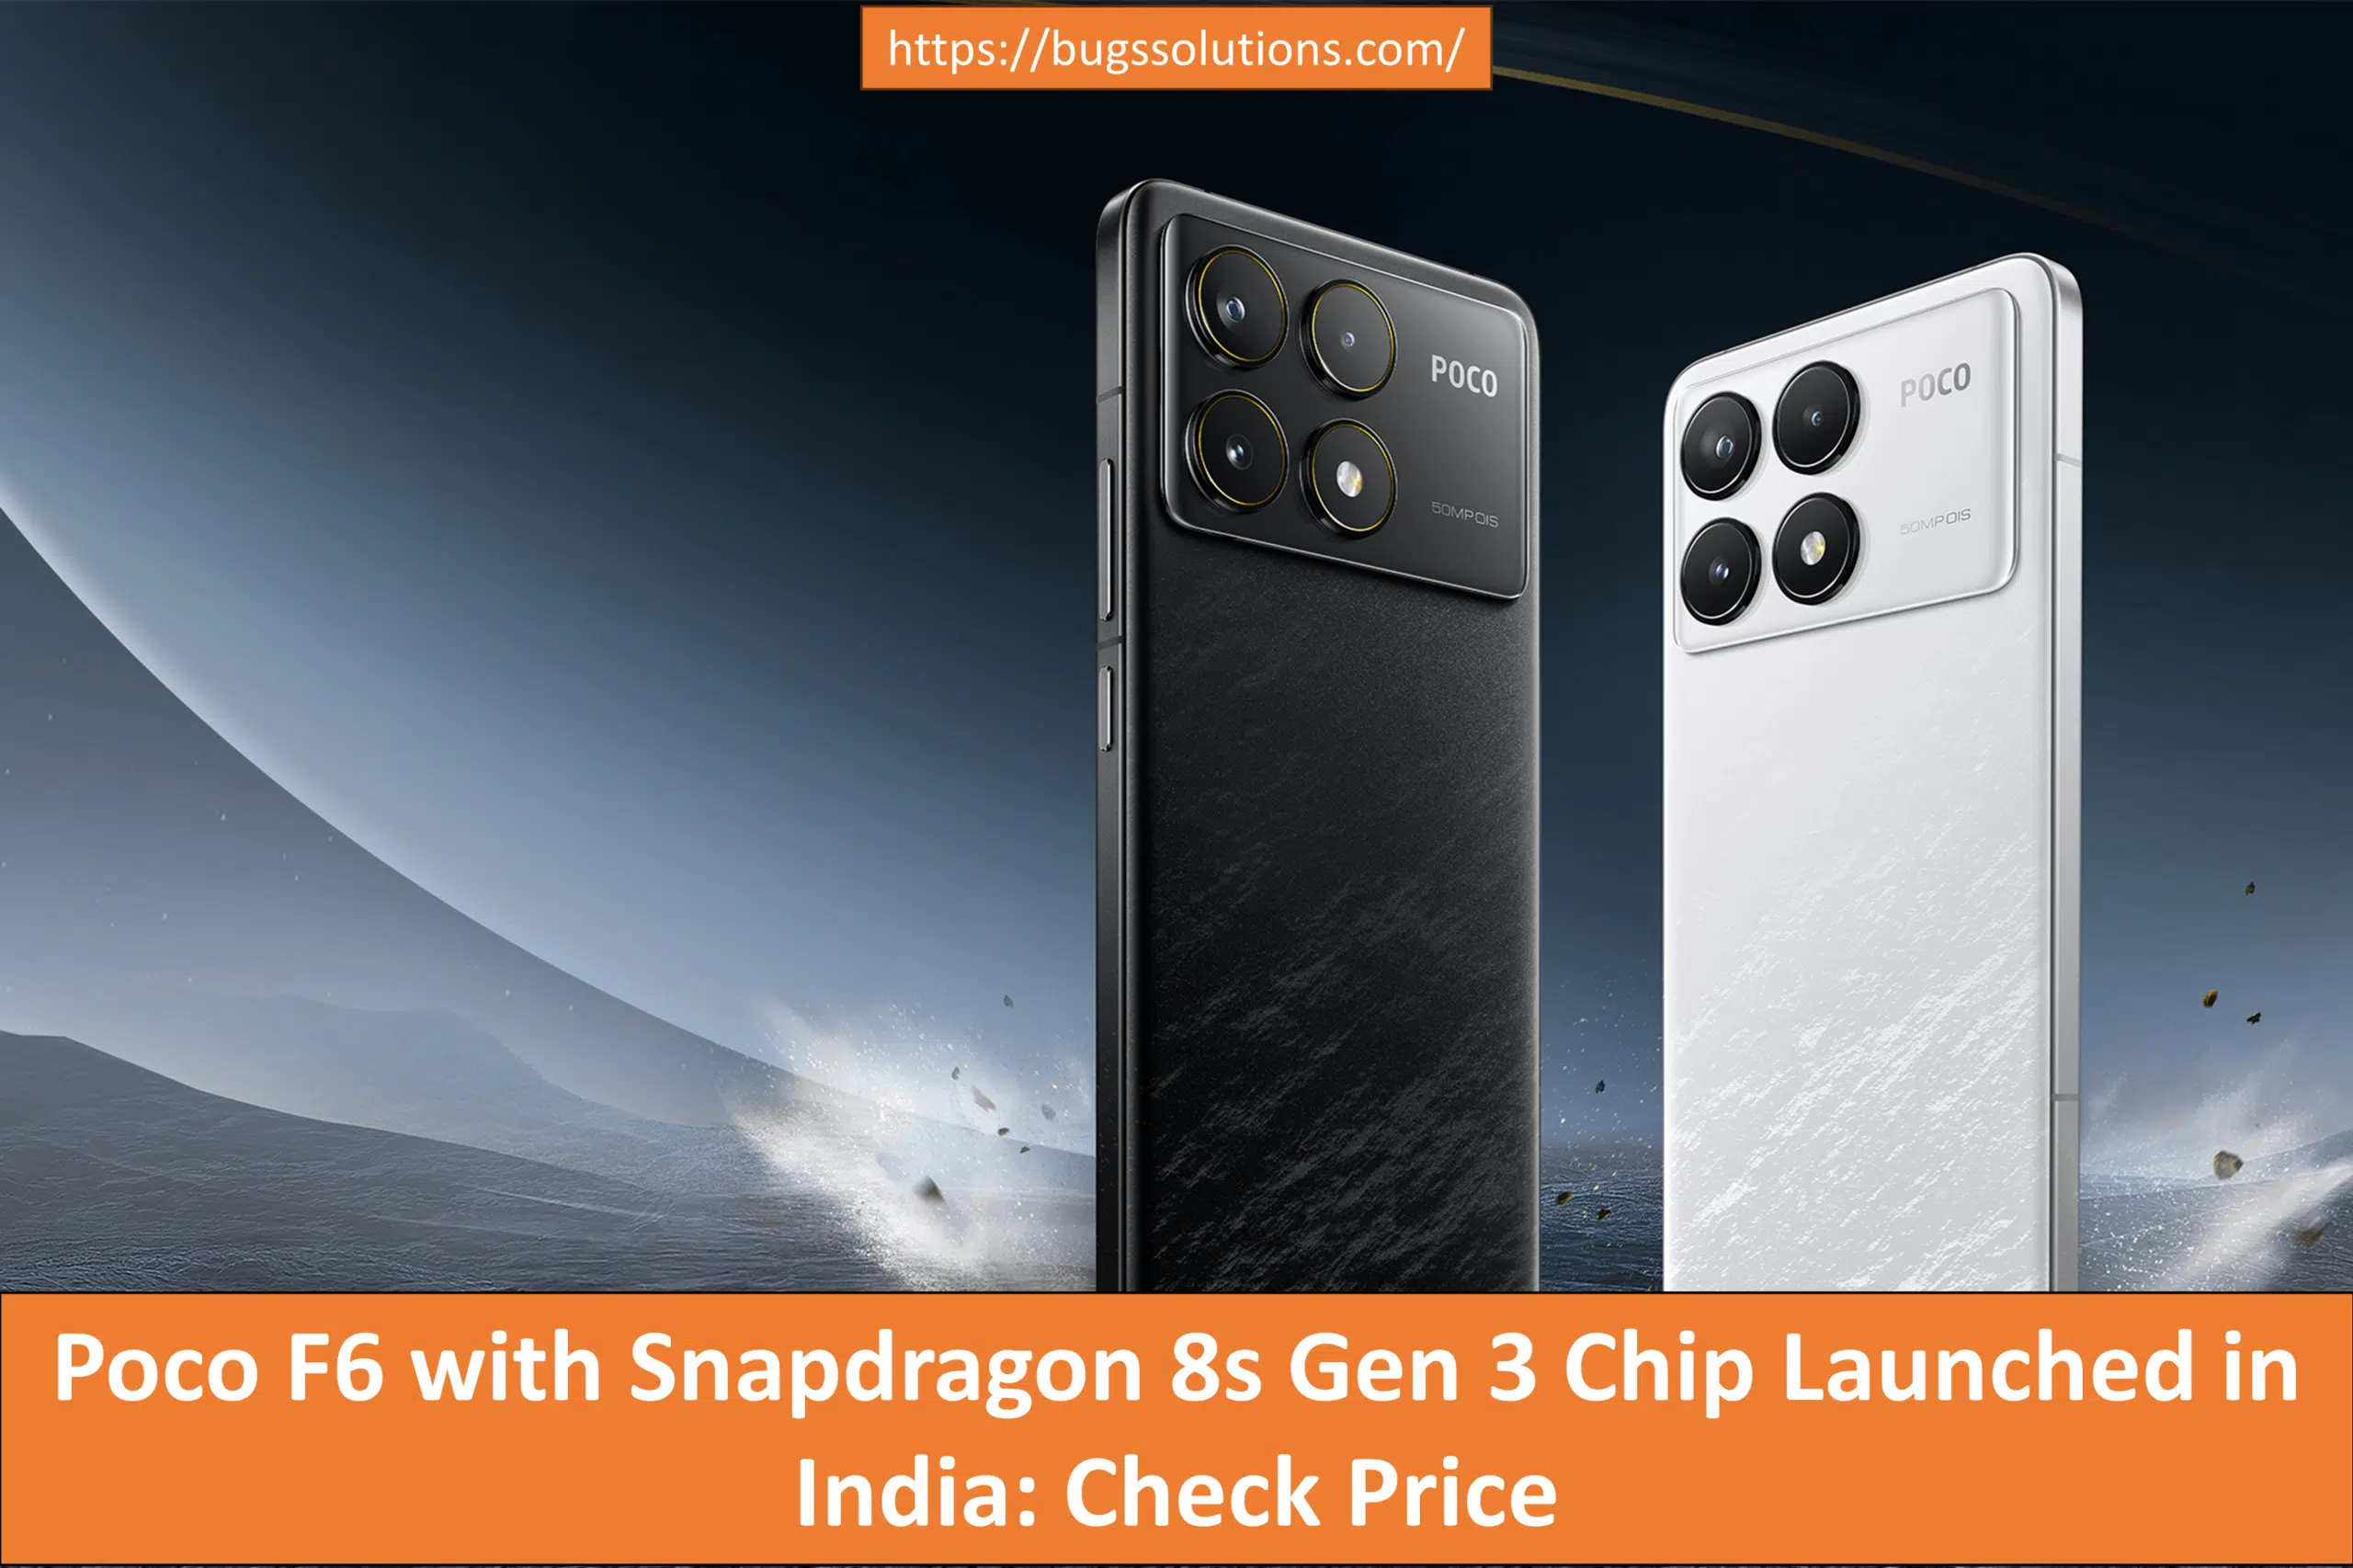 Poco F6 with Snapdragon 8s Gen 3 Chip Launched in India: Check Price